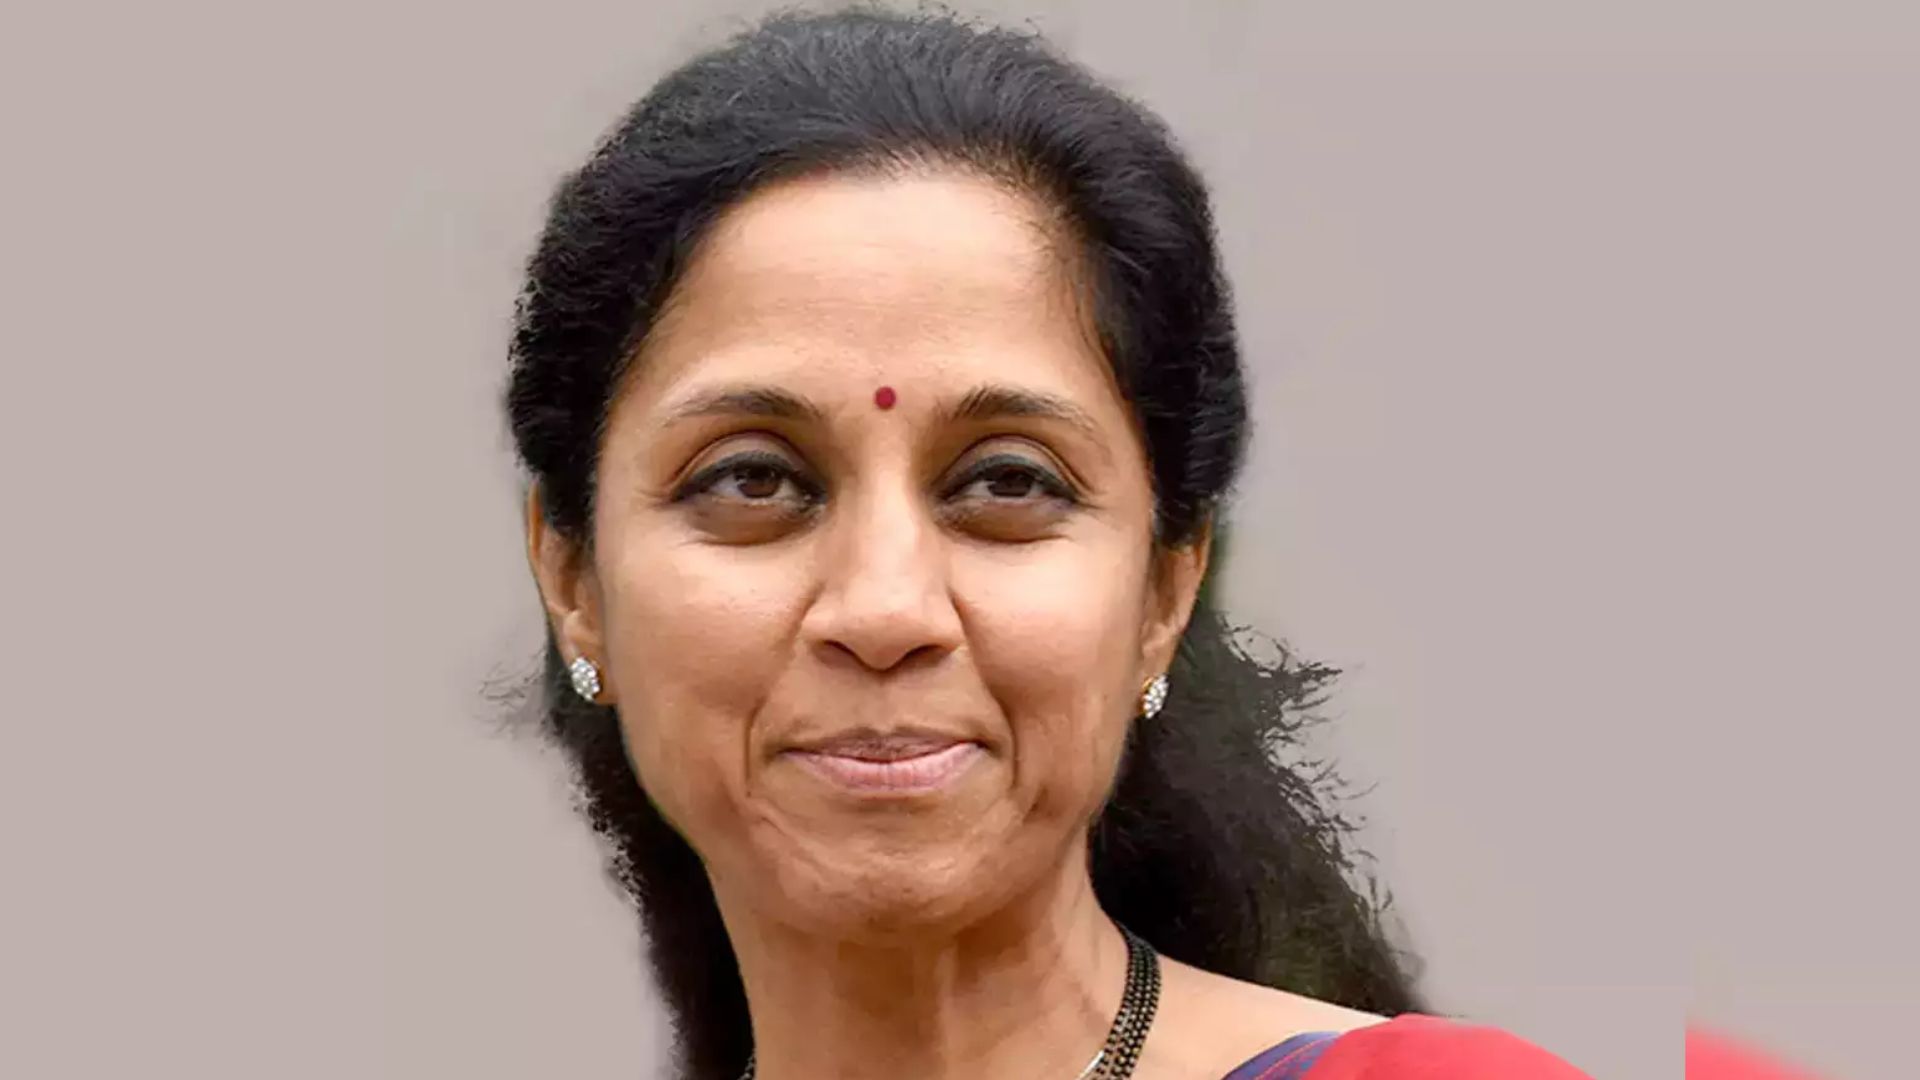 Polls Should Be Conducted With Truth, Transparency, Says Supriya Sule